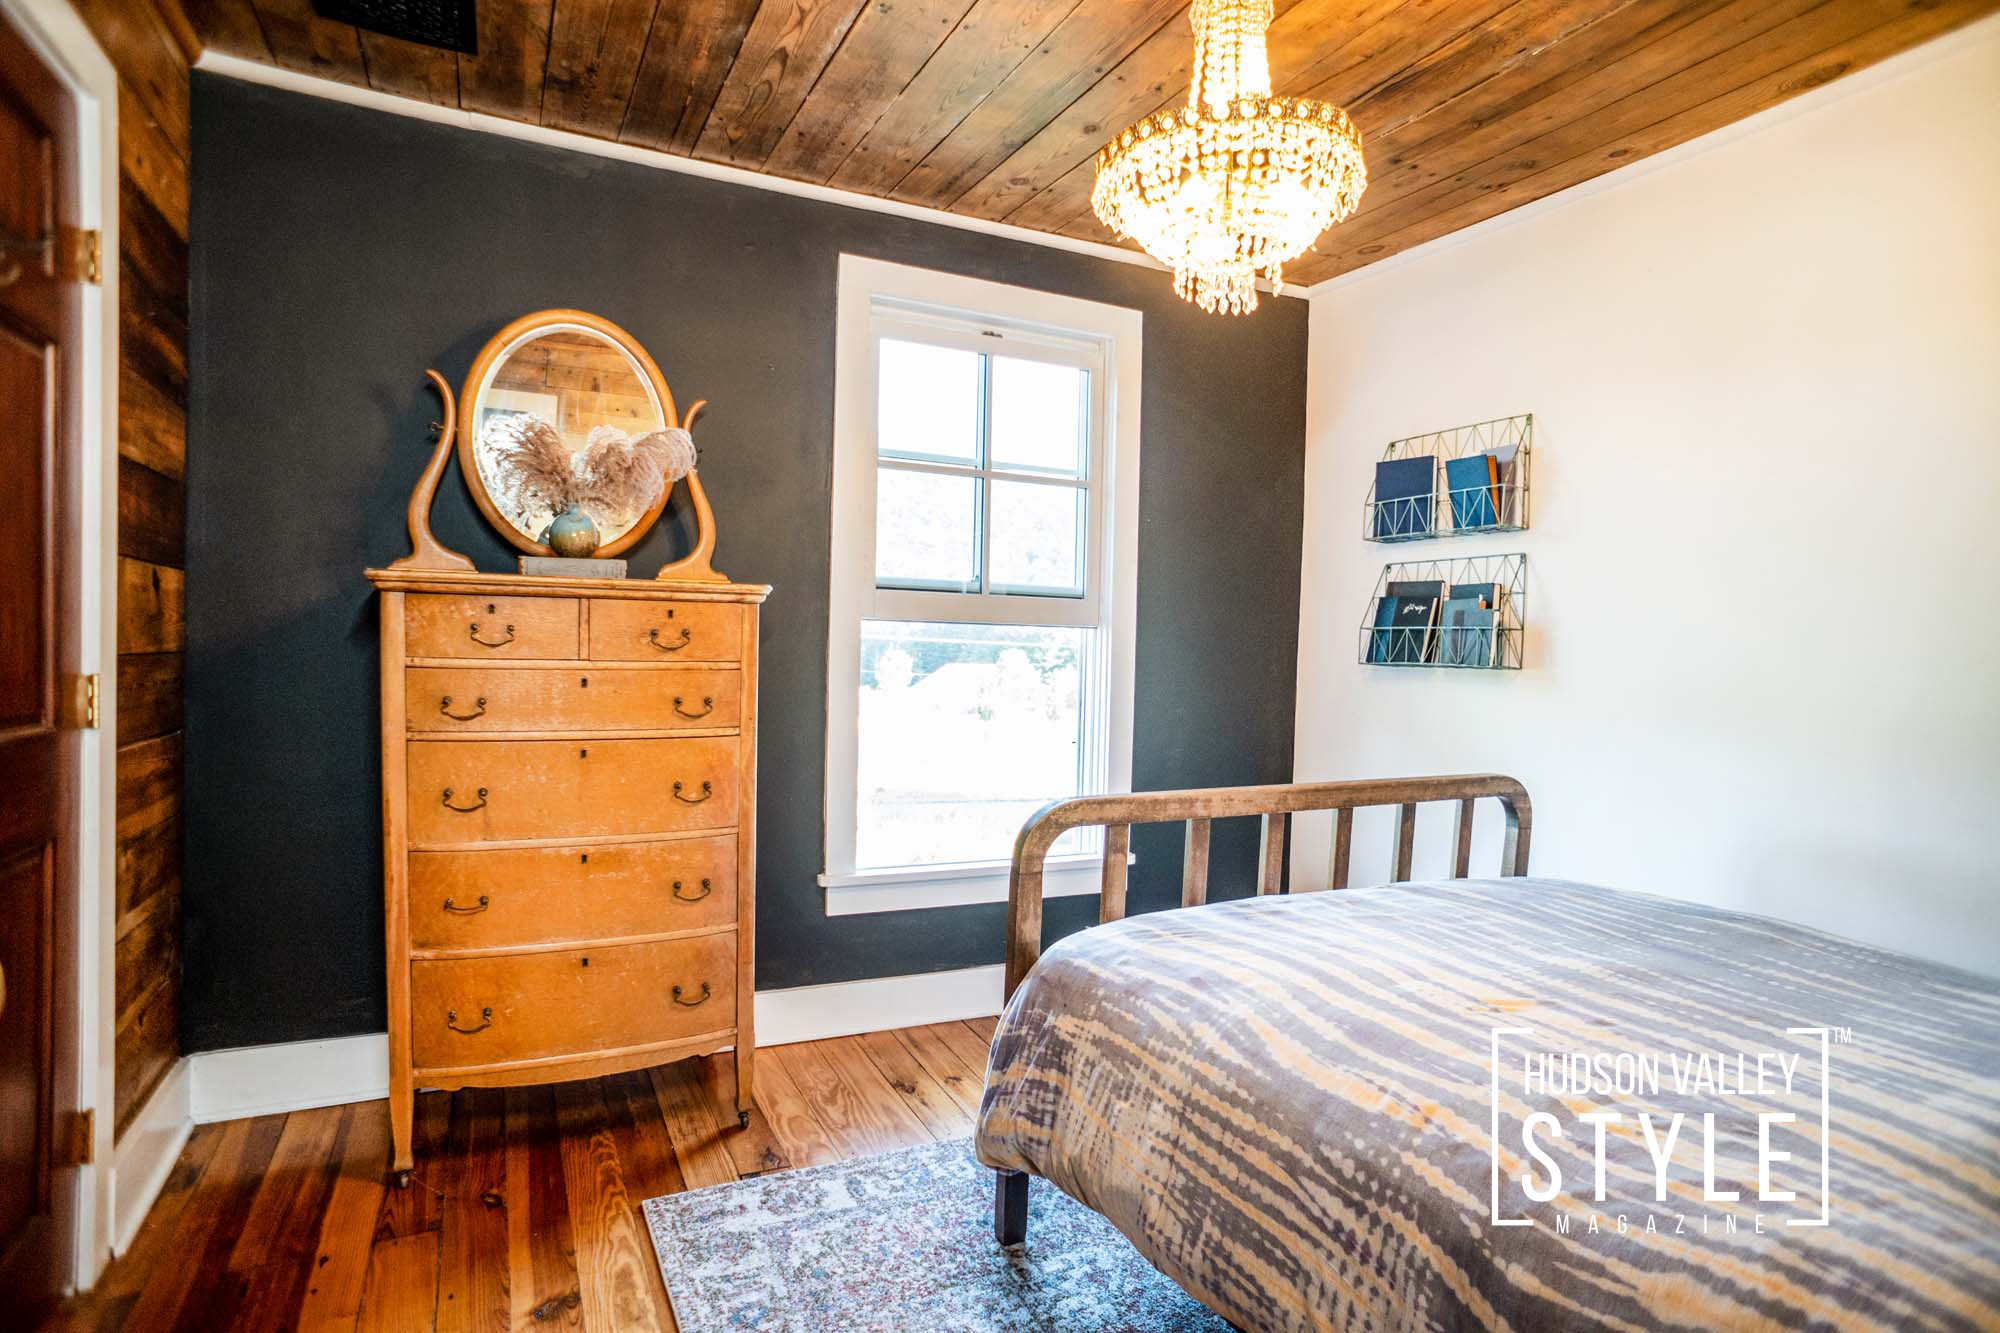 Nostalgic Charm: Modern Rustic Airbnb Experiences in the Hudson Valley and Catskills – Presented by ALLUVION MEDIA – The Best Airbnb Photographer – Vacation Rental Management